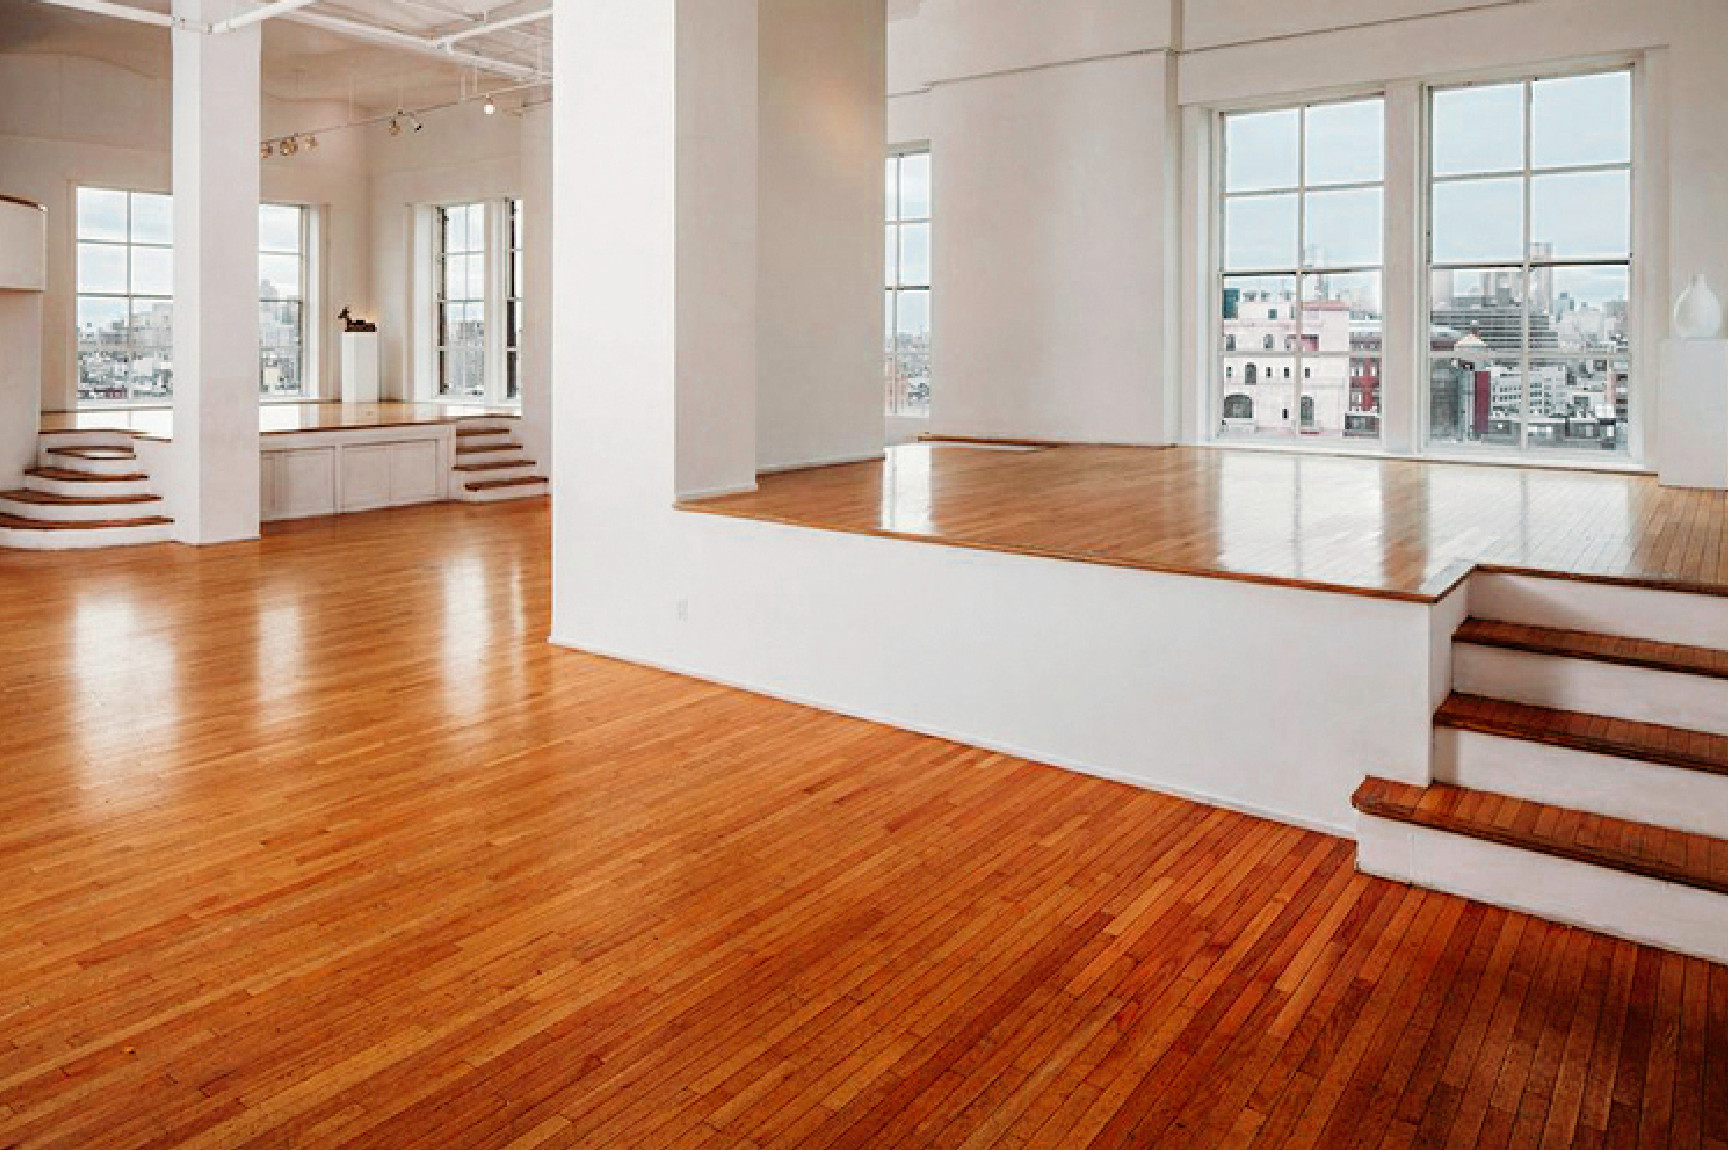 14 Lovely Hardwood Floor Installation New York City 2024 free download hardwood floor installation new york city of search plan and book your private event in new york city nyc ny intended for ramscale studios event space in new york city nyc ny nj area